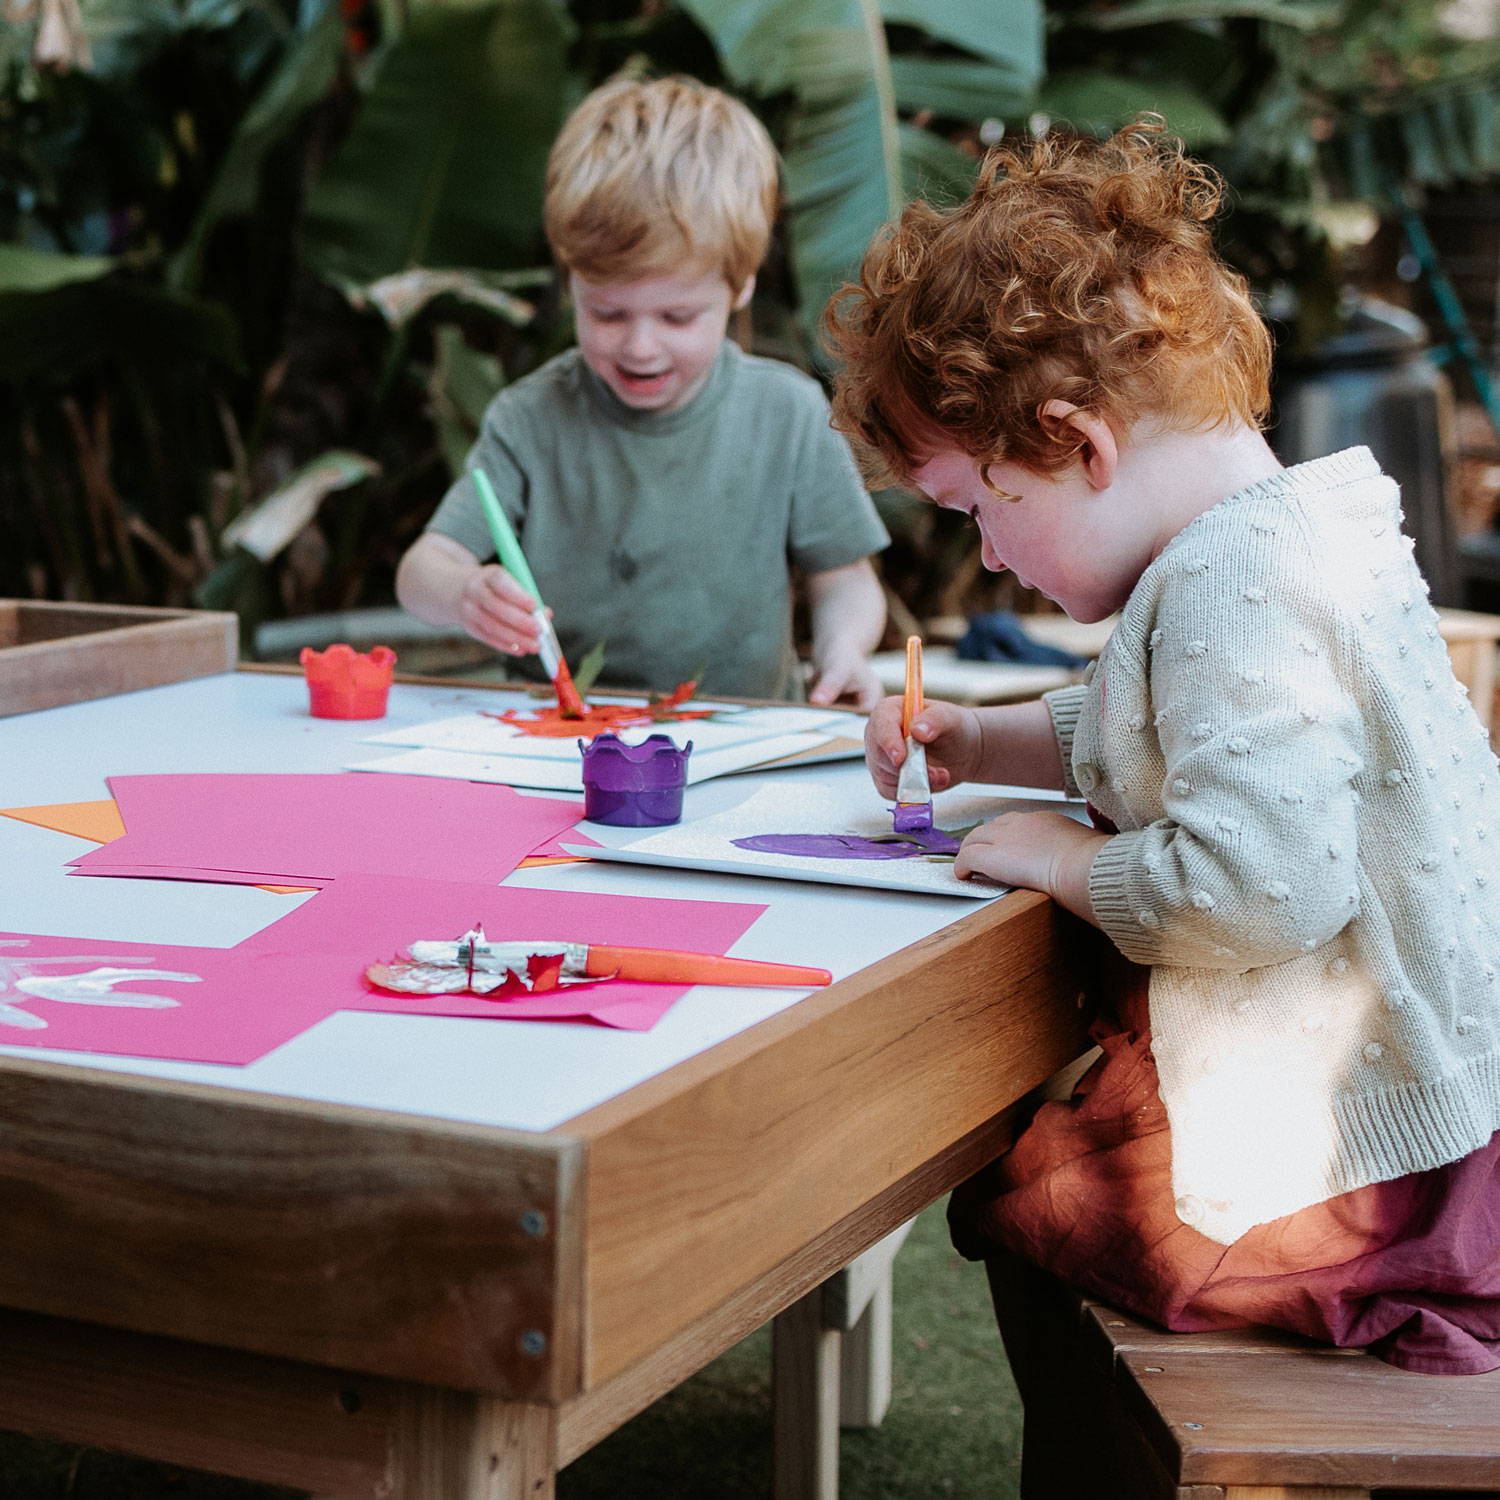 Children Expressing Their Creativity by Painting on an Art Table with Paint Brushes